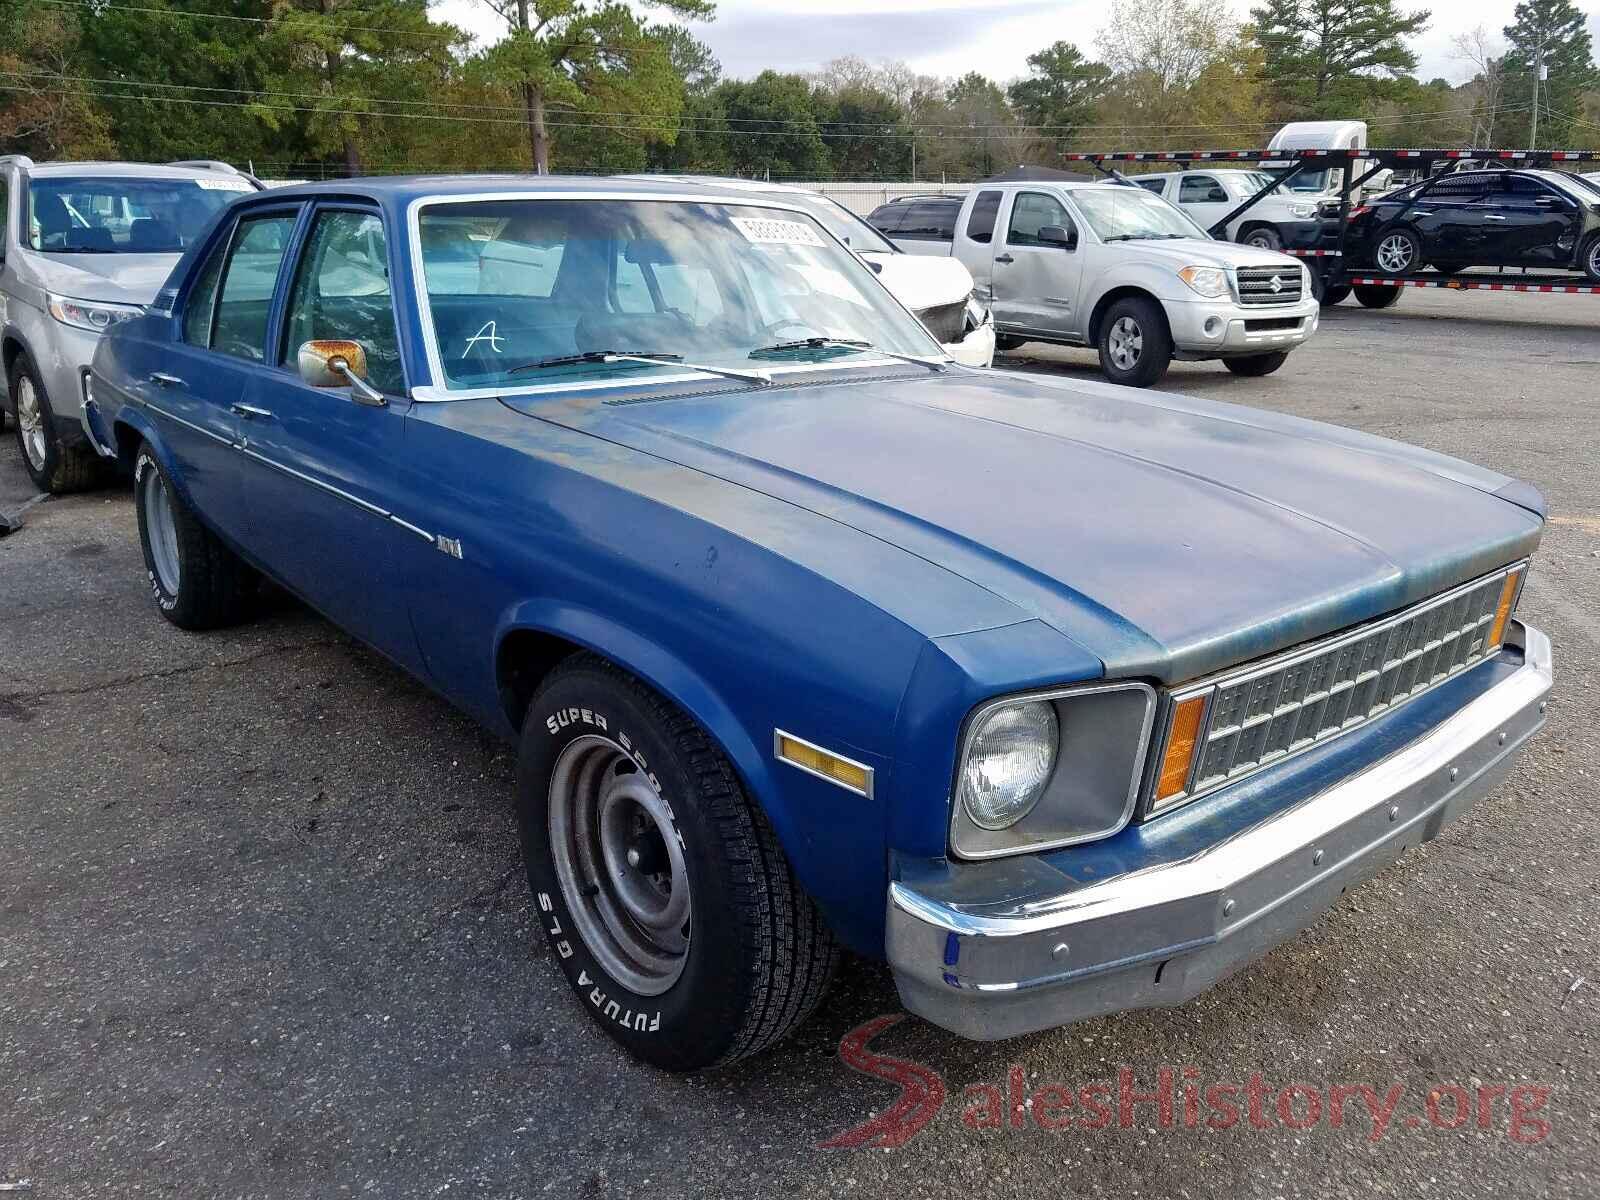 1X69D6K126049 1976 CHEVROLET ALL OTHER